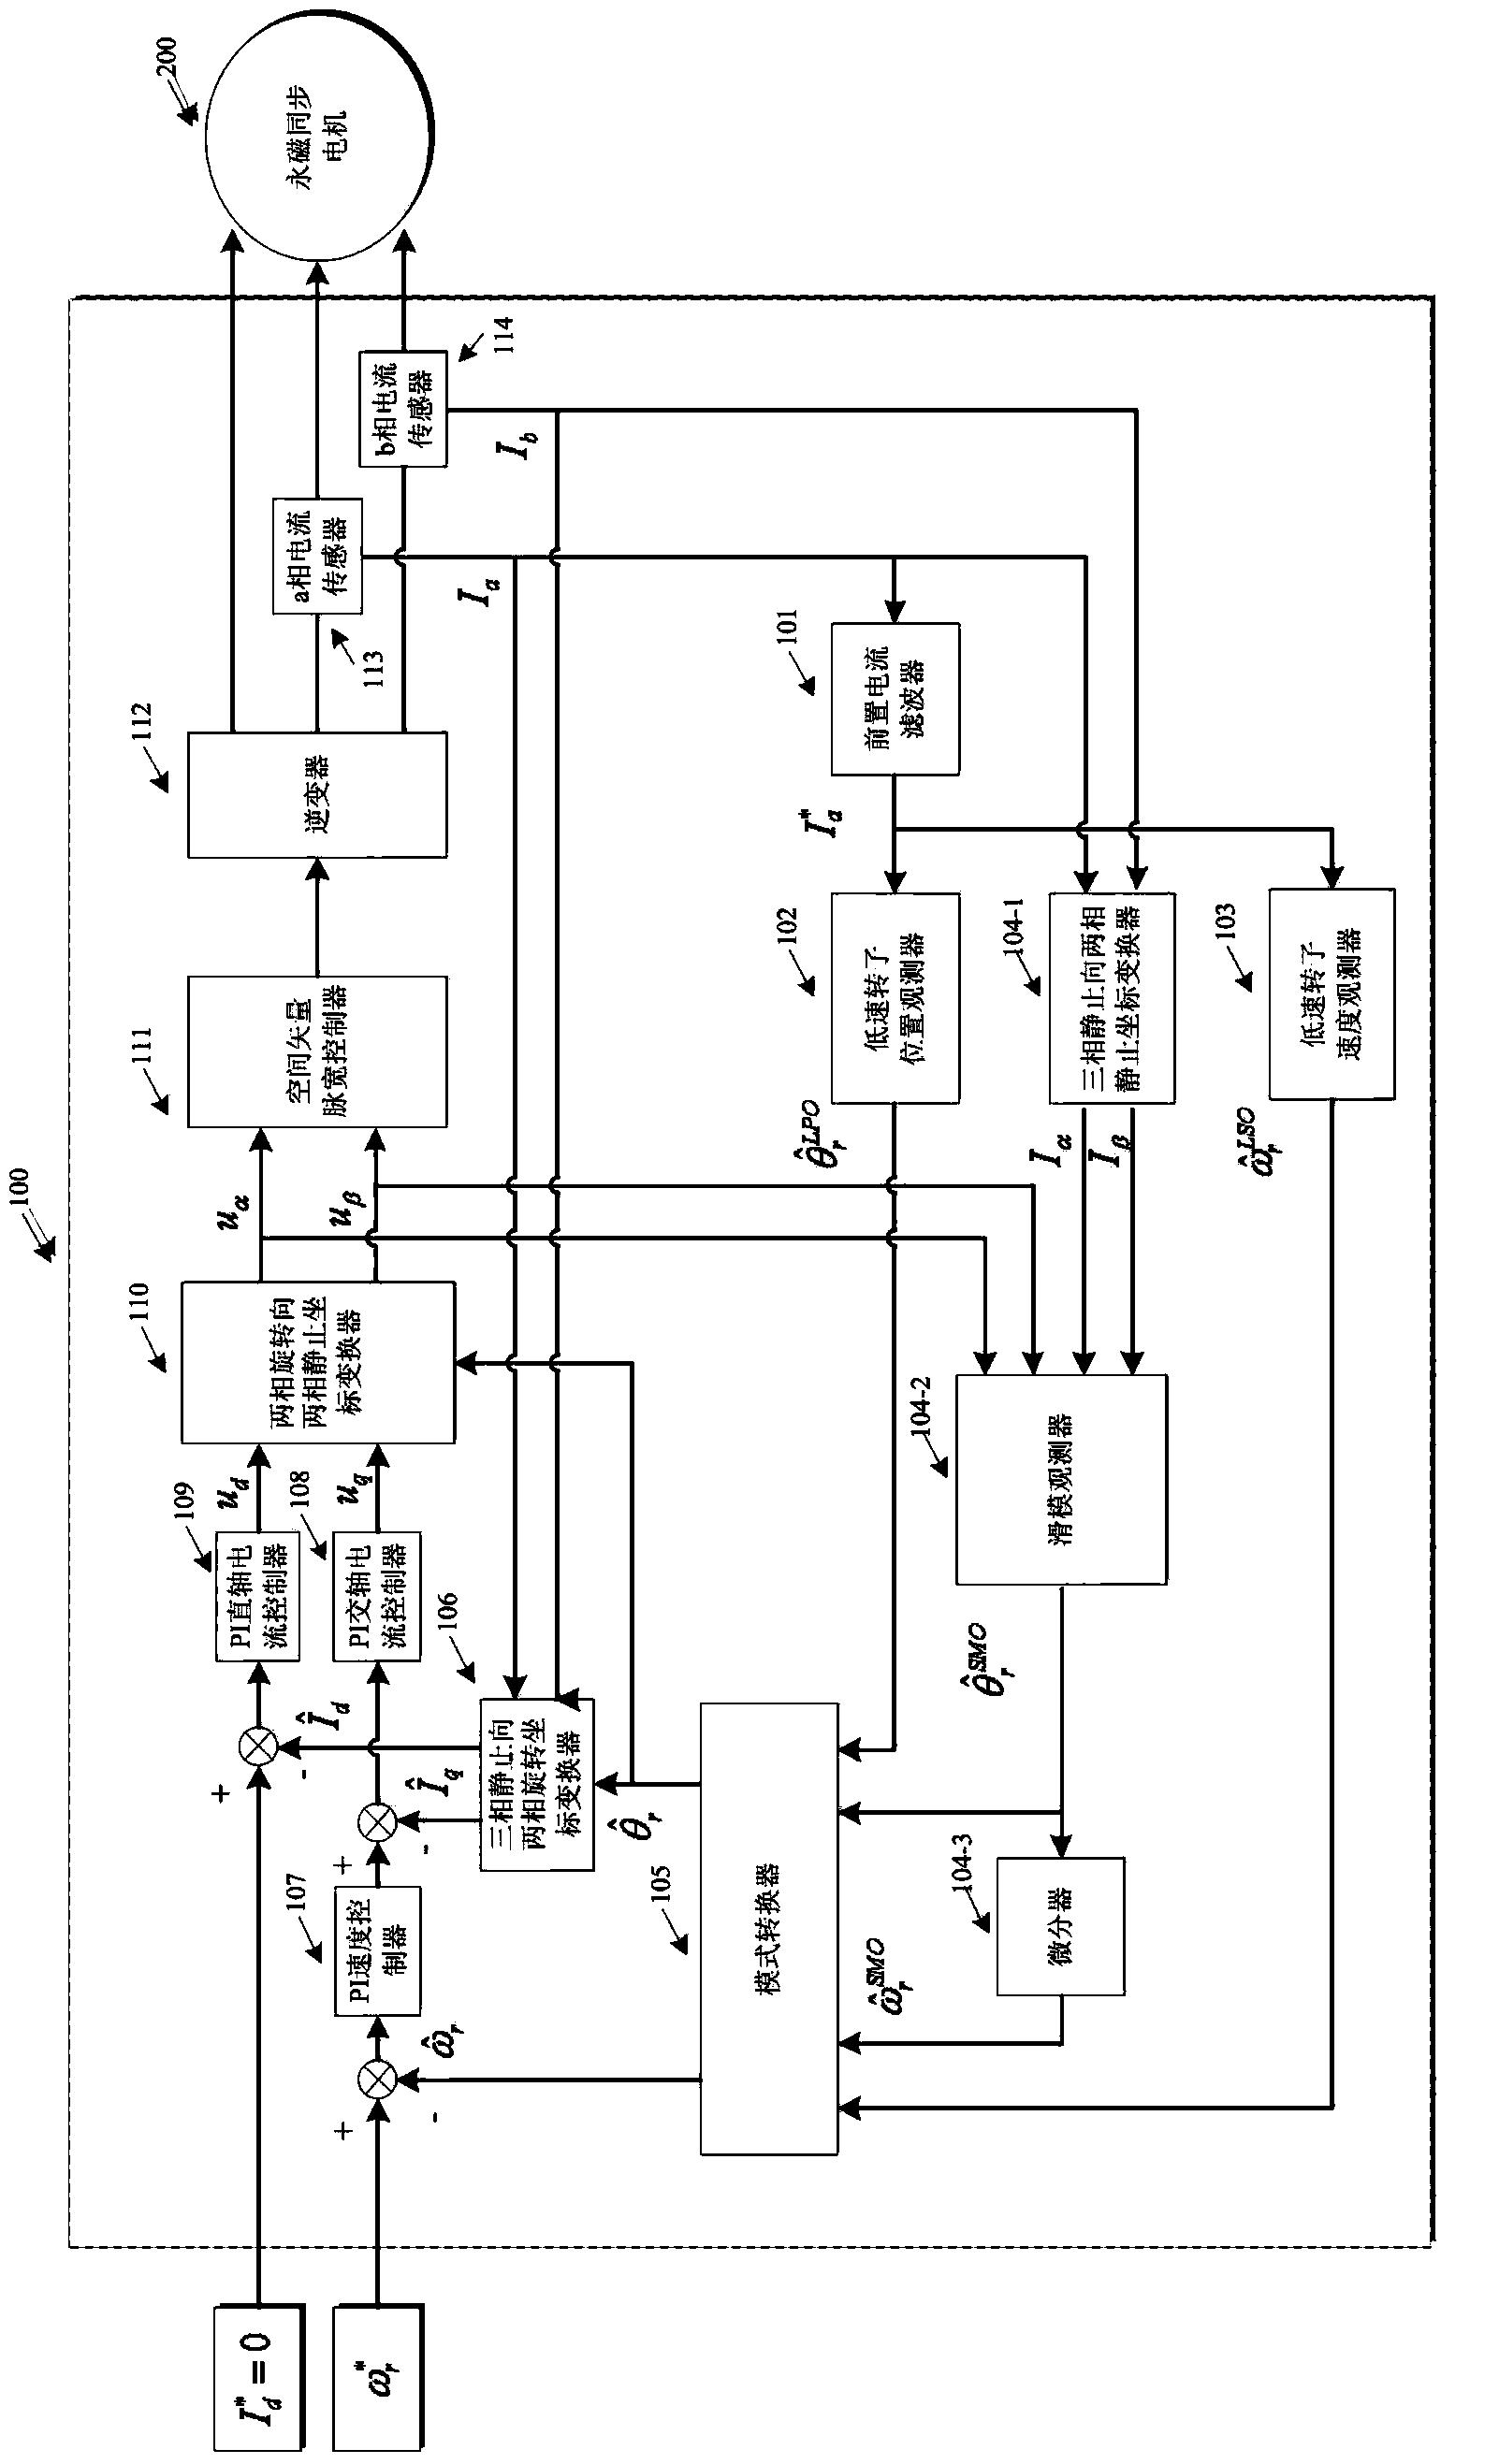 Sensorless vector control system and method for permanent magnet synchronous motor